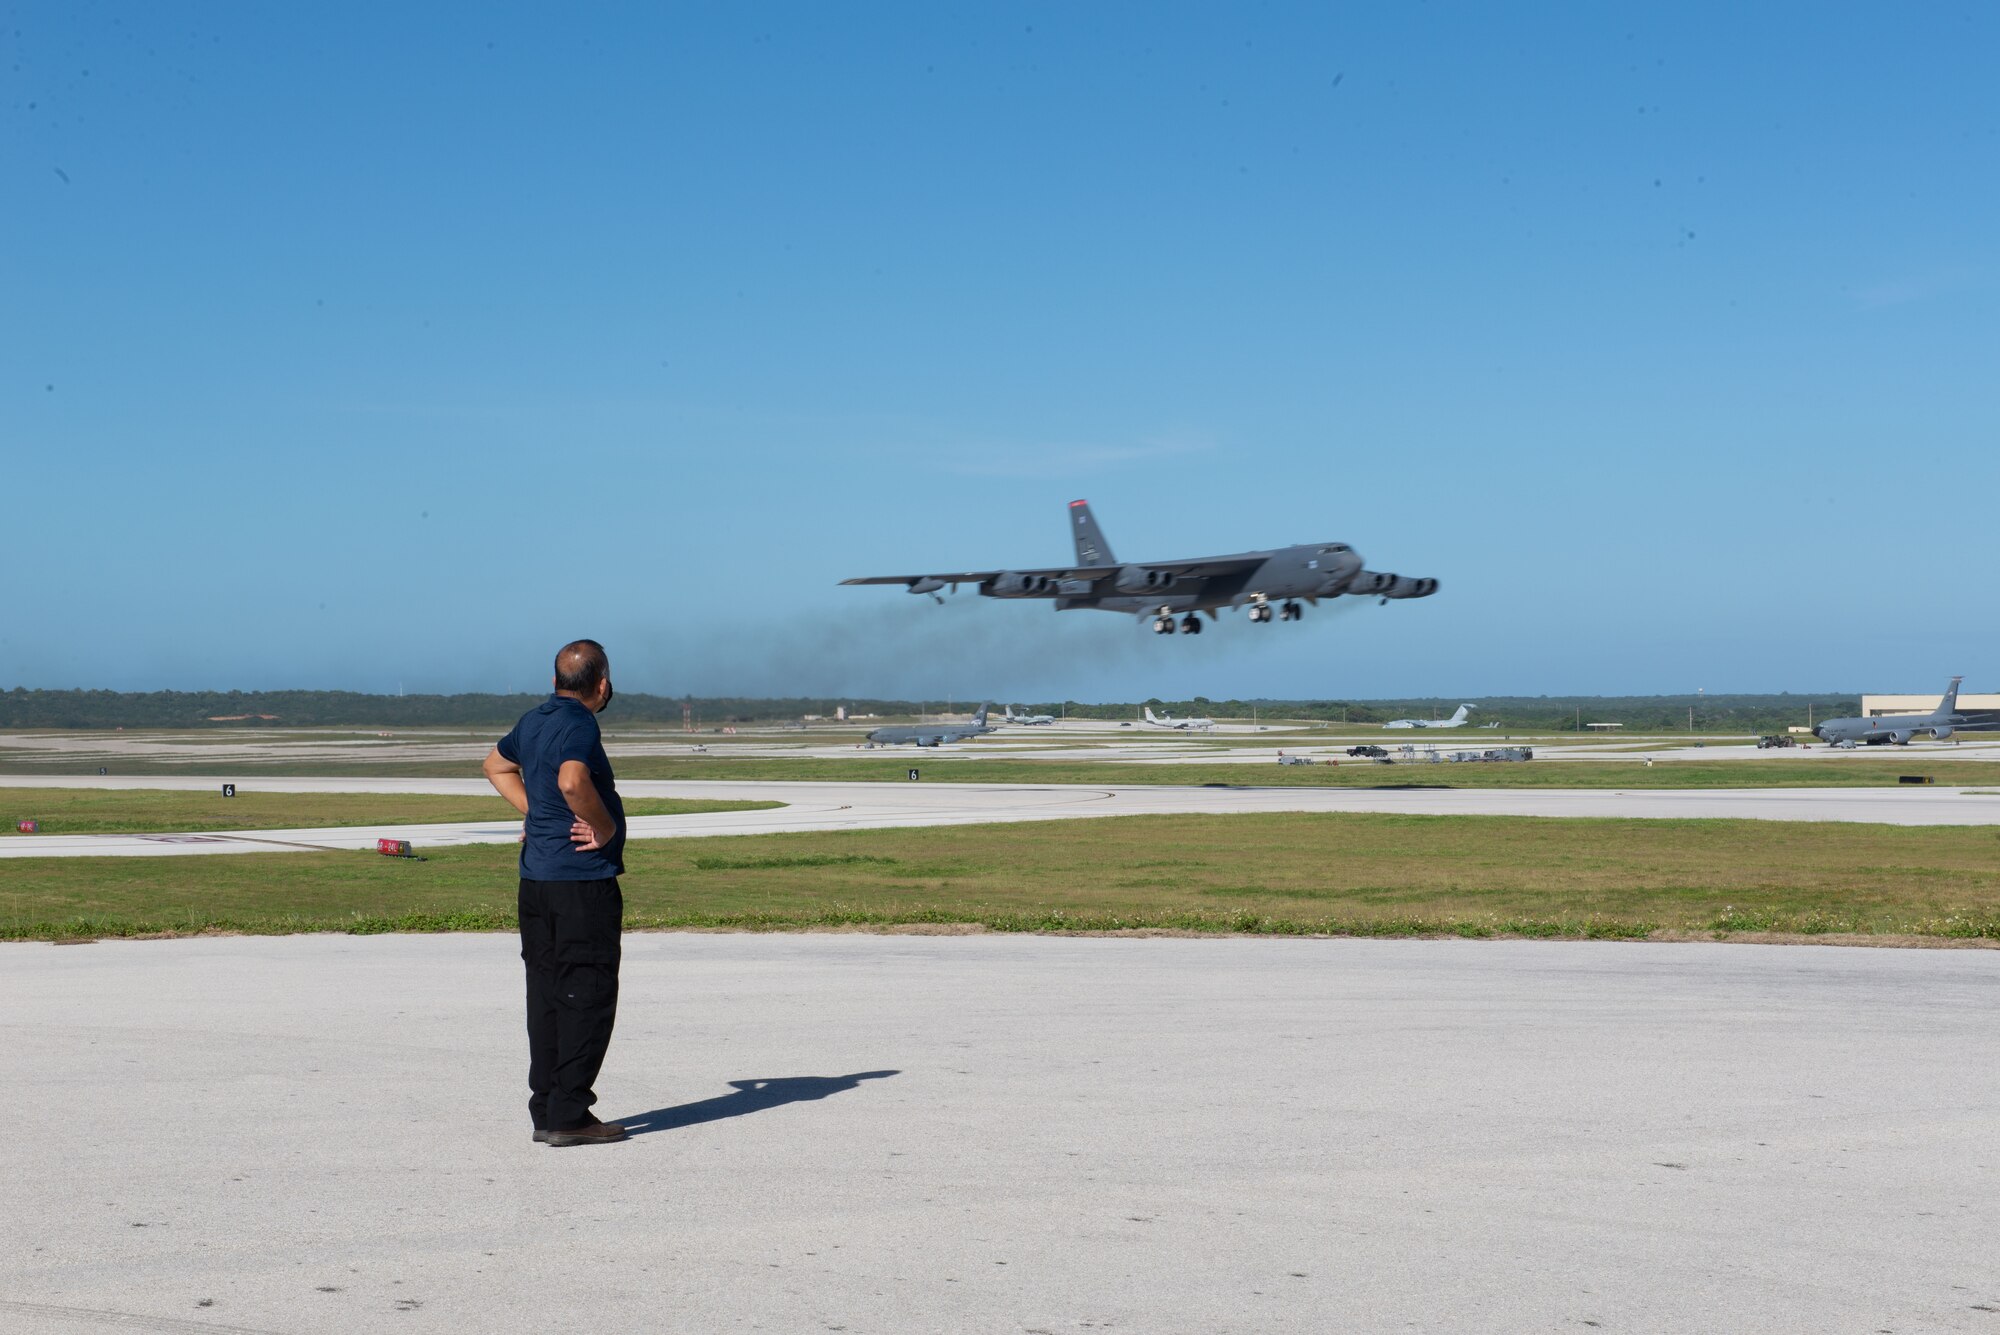 Raymon Perez, 736th Security Forces Squadron, watches a B-52 Stratofortress take off from Andersen Air Force Base, Guam, Feb. 10, 2021.